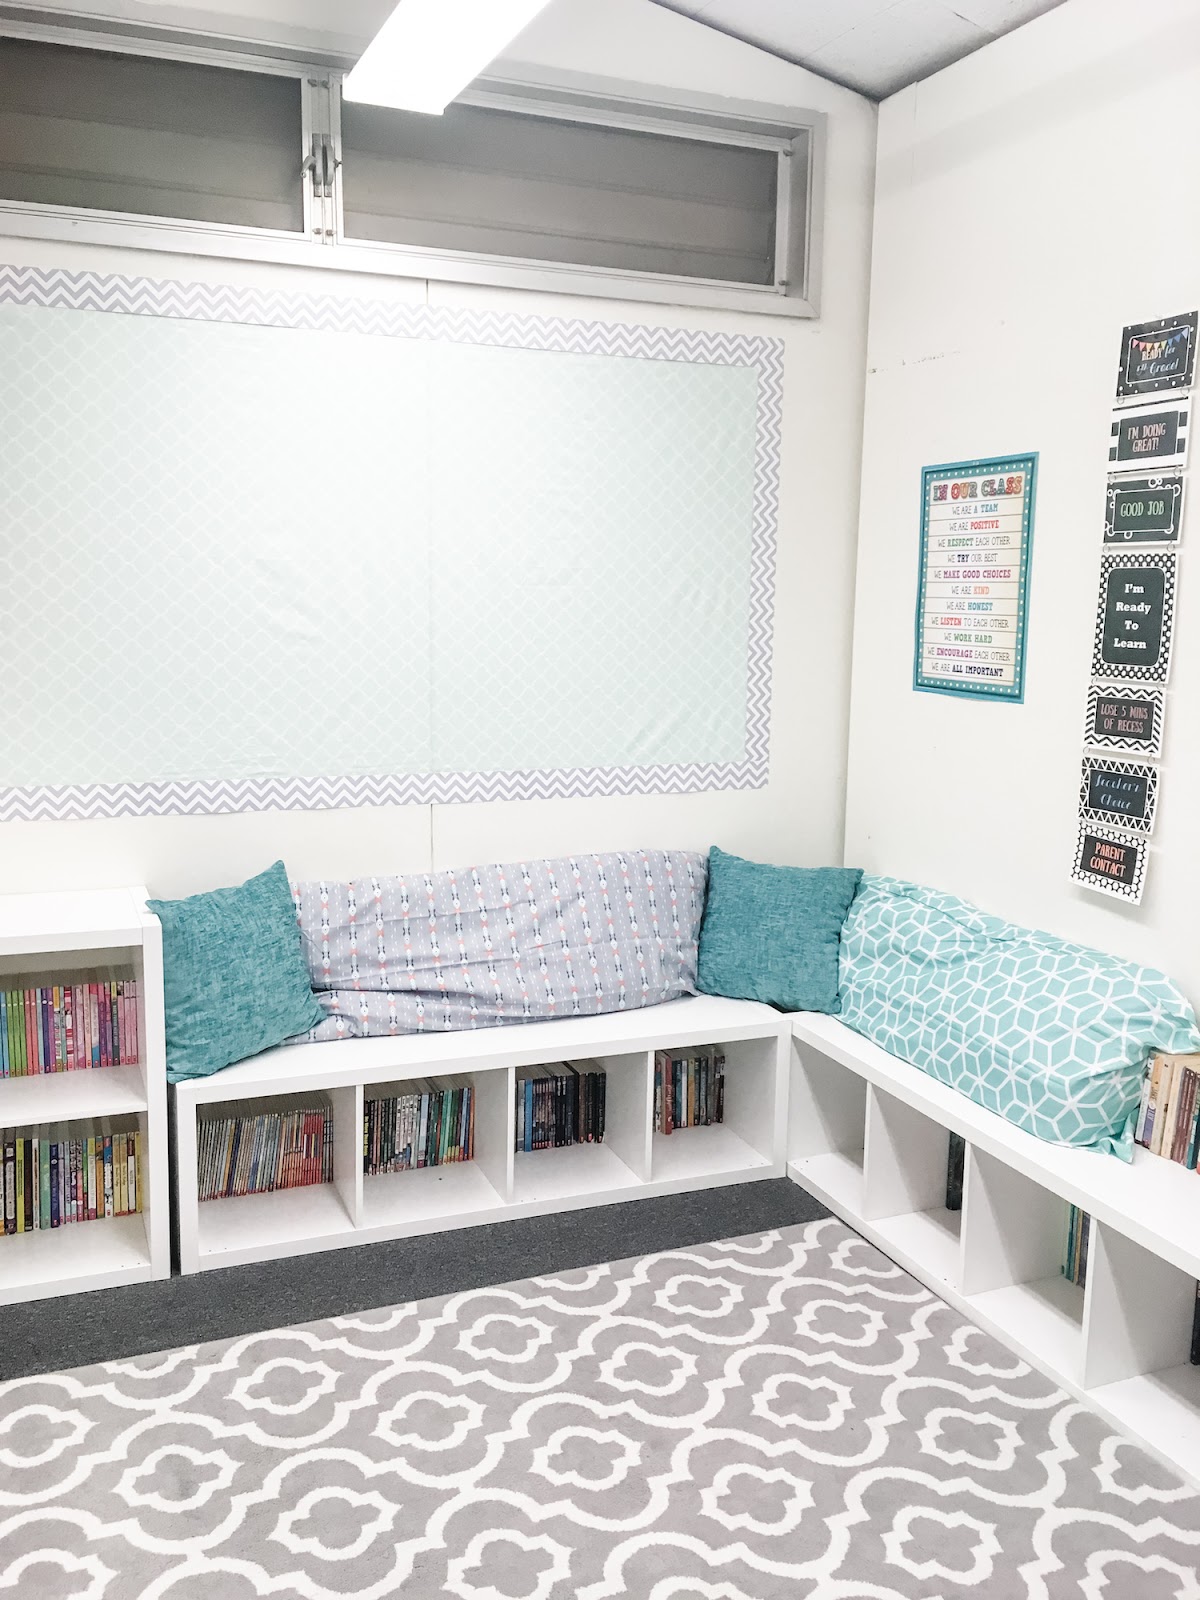 This image shows a cozy classroom reading corner with pillows on a bench seat and books underneath. 